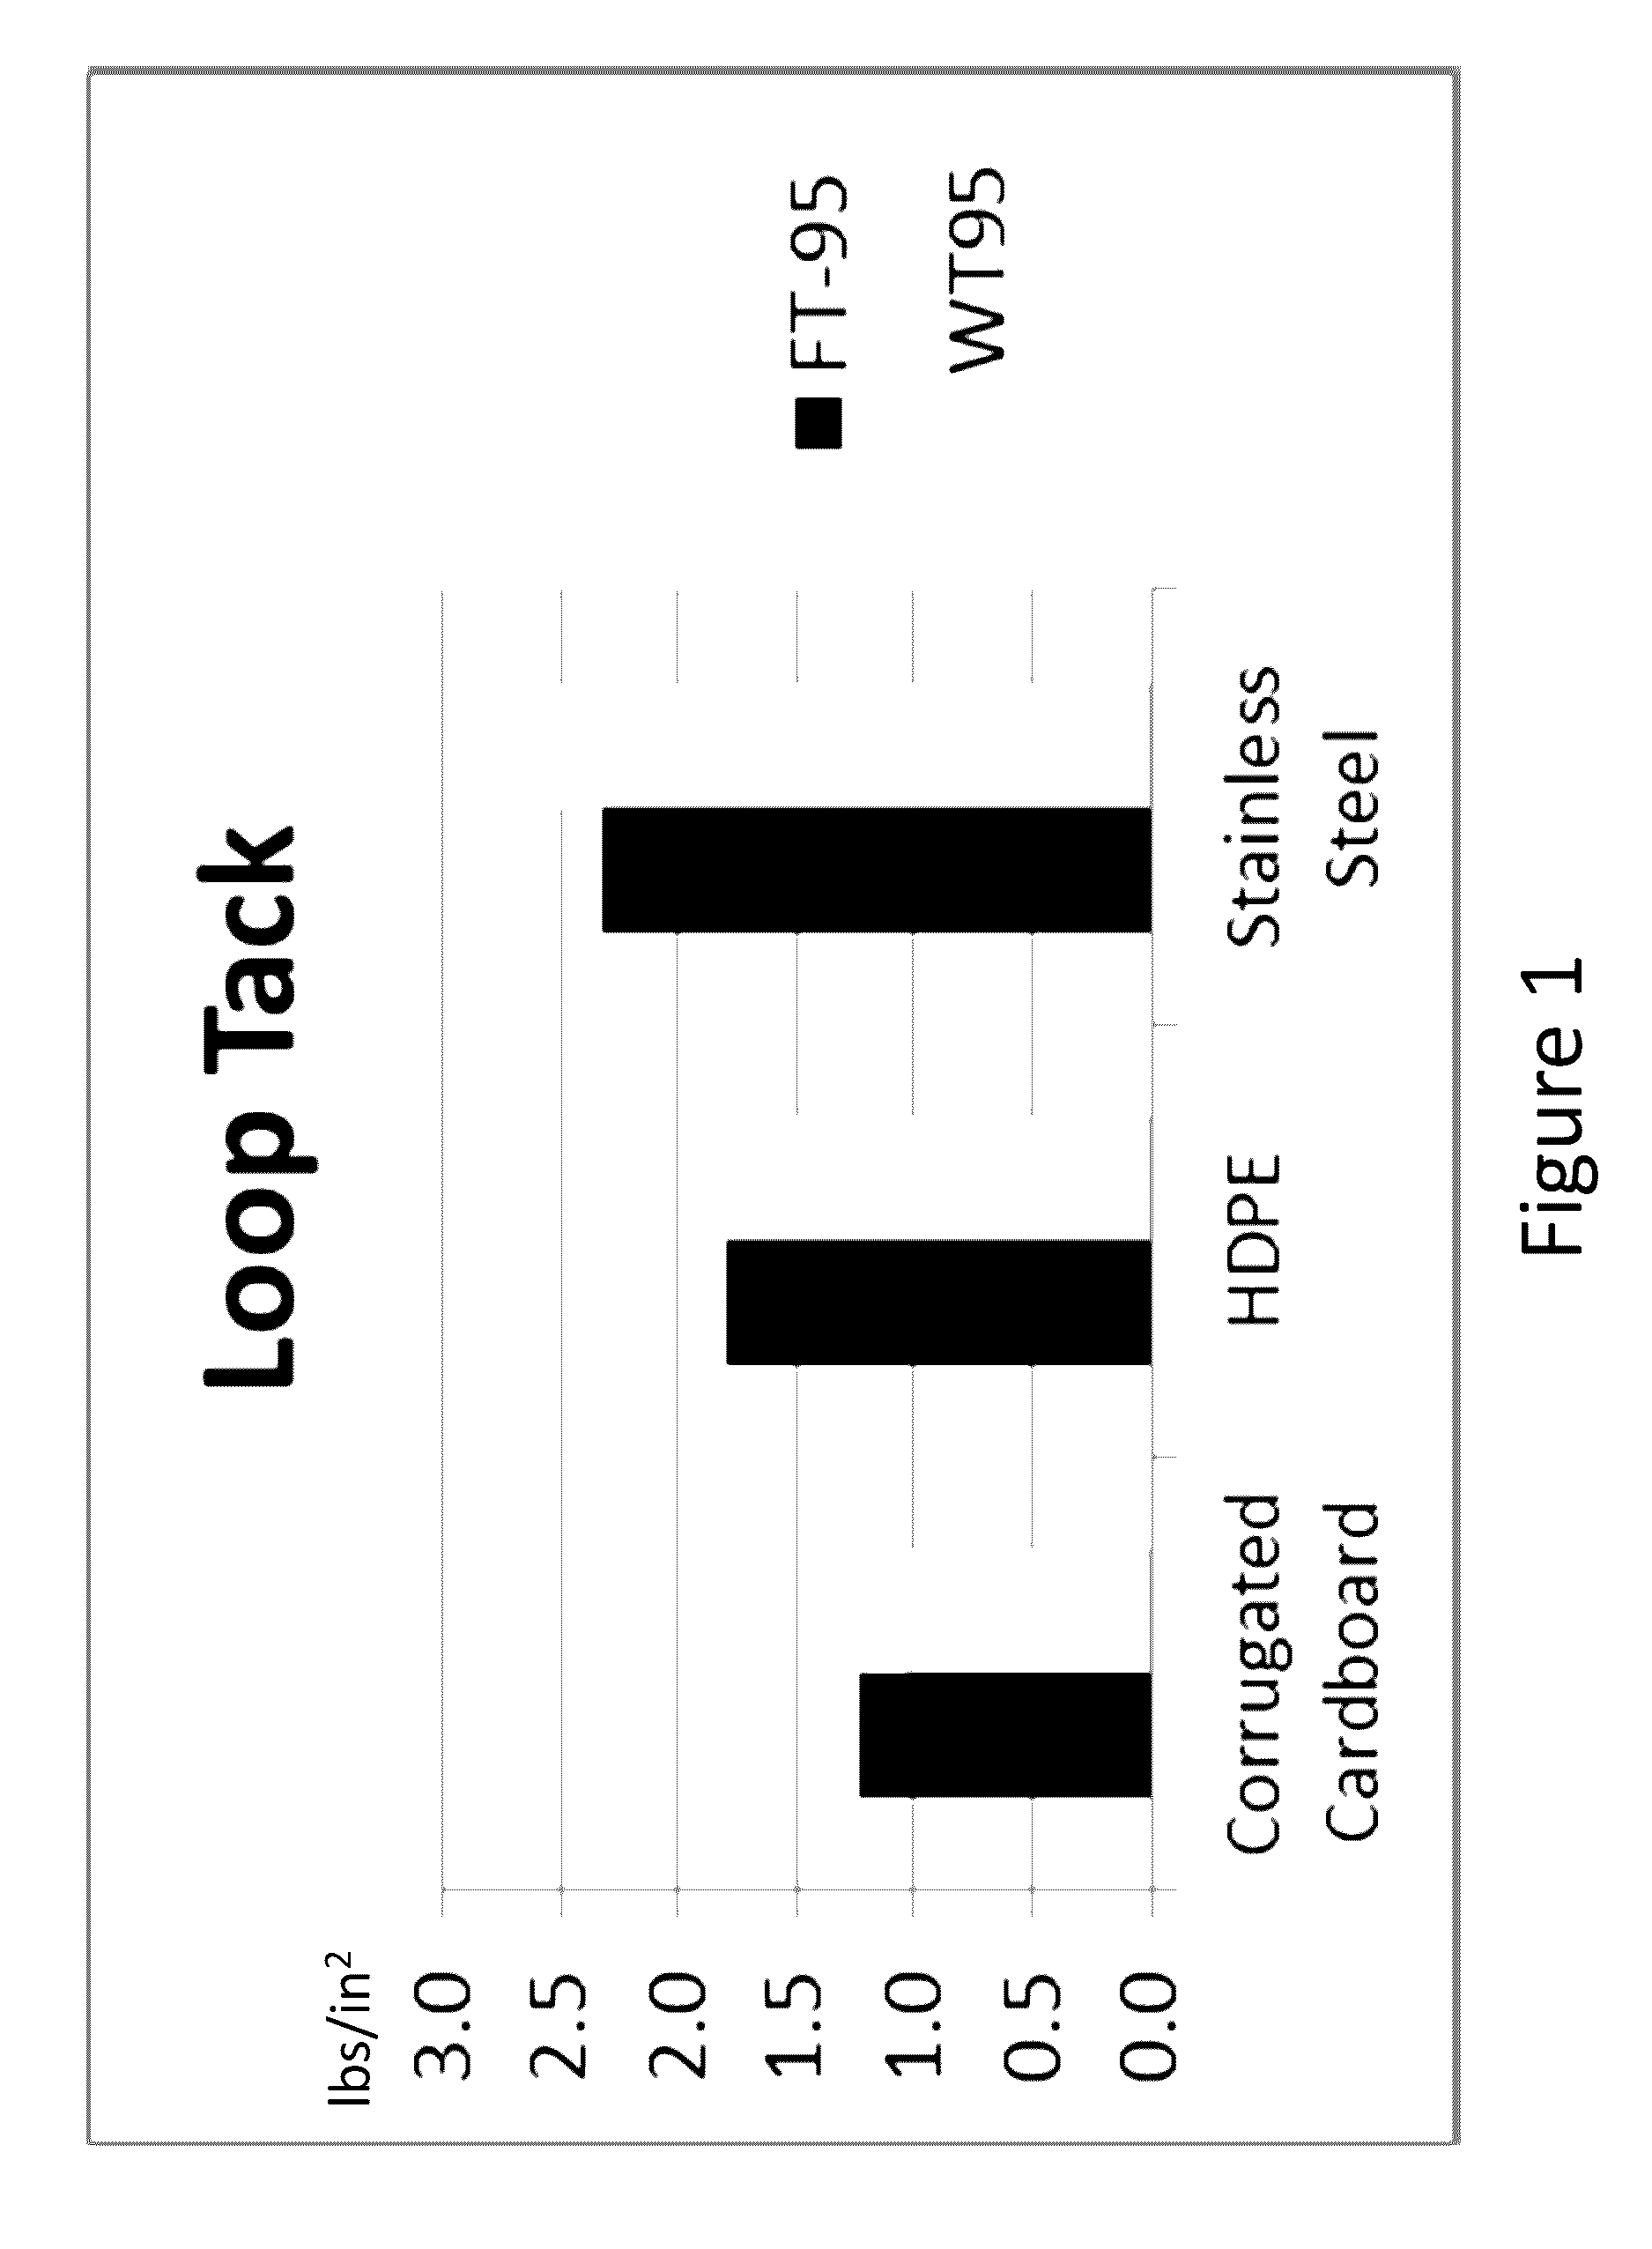 Farnesene-based tackifying resins and adhesive compositions containing the same